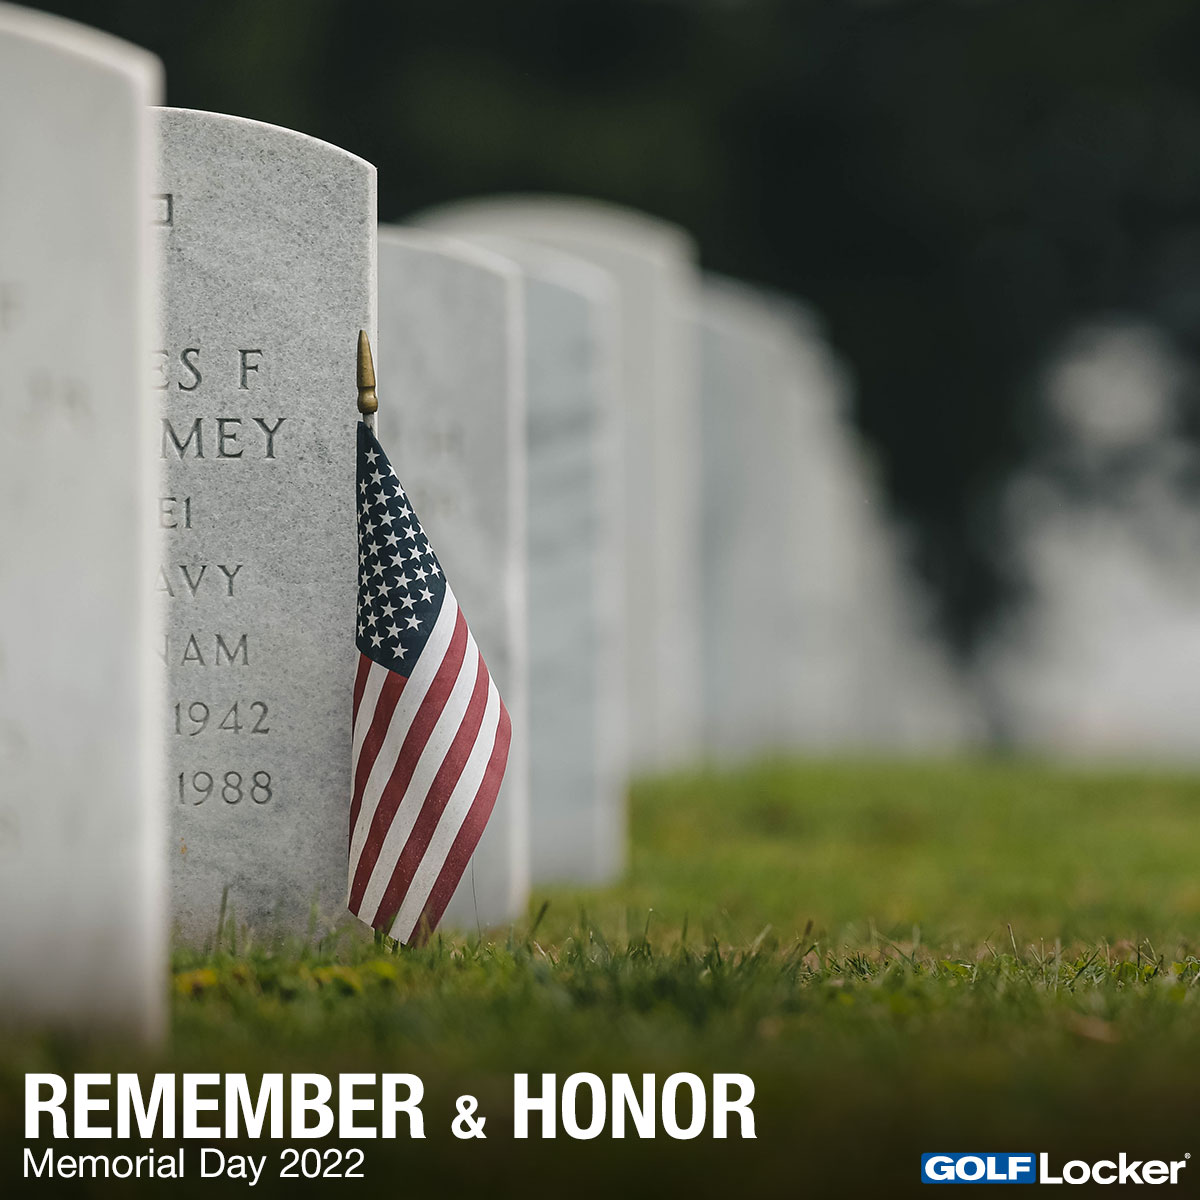 Memorial Day 2022 - Remember & Honor Those Who Served.